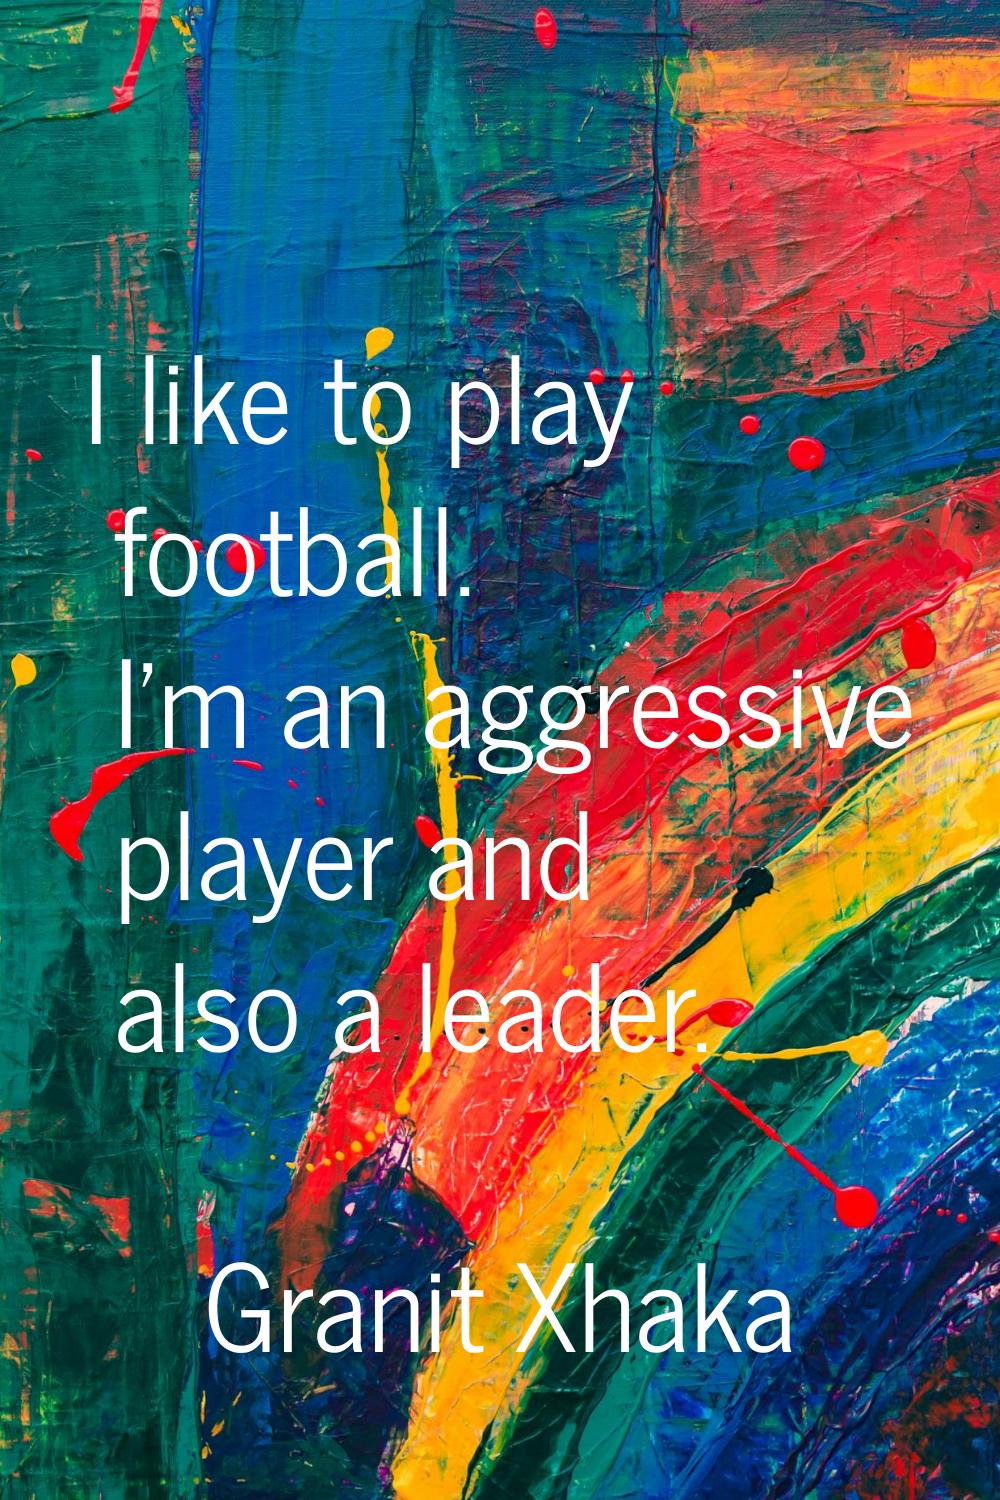 I like to play football. I'm an aggressive player and also a leader.